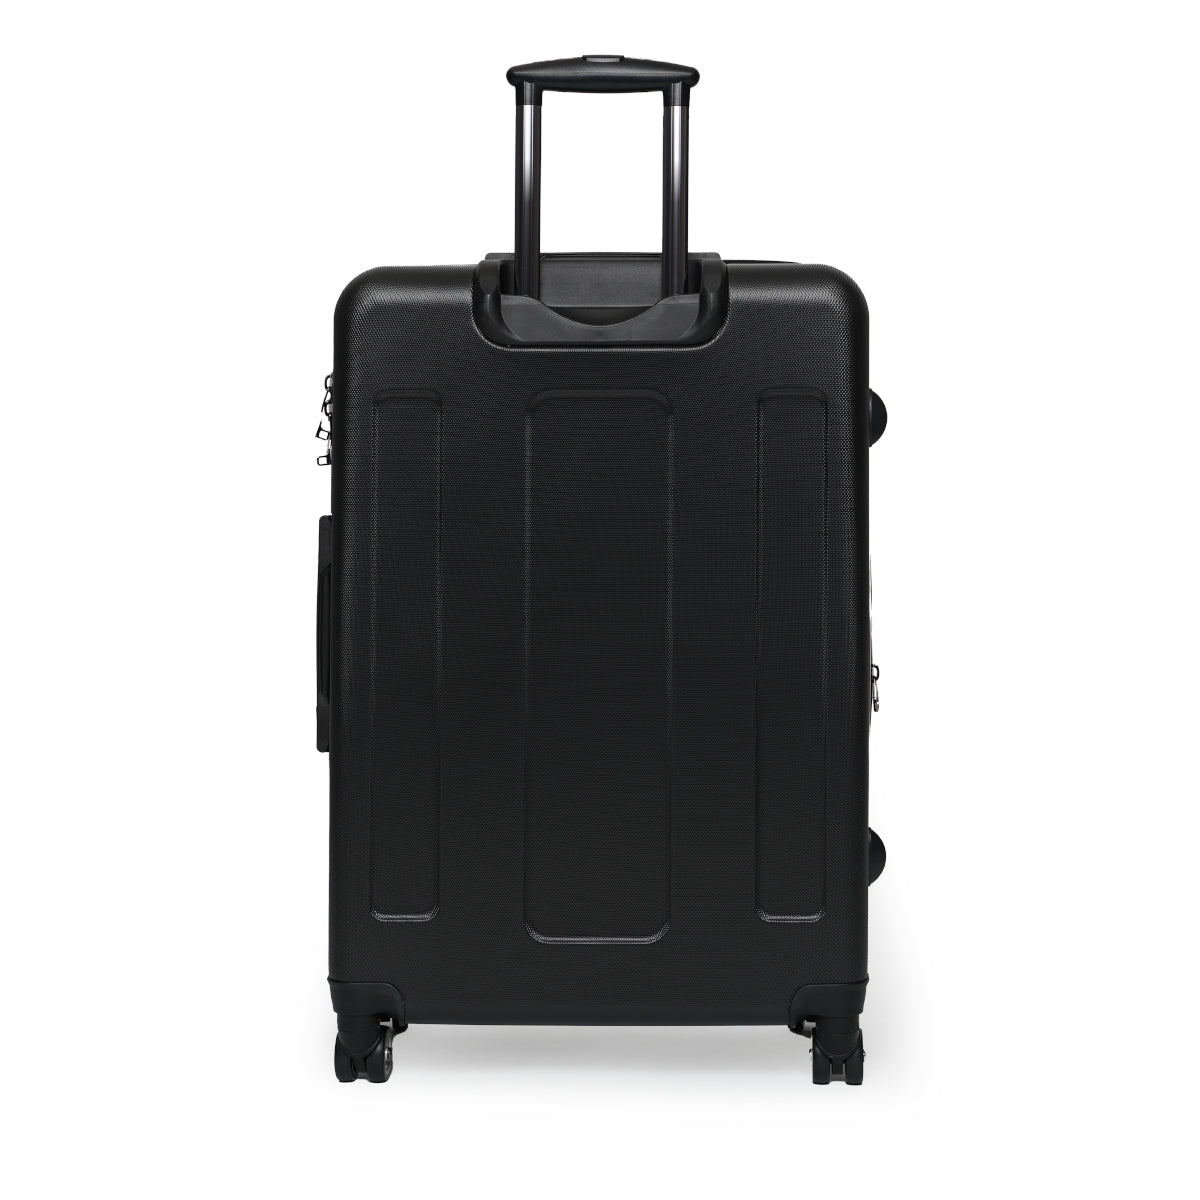 Getrott Nirvana Nevermind 1991 Black Cabin Suitcase Inner Pockets Extended Storage Adjustable Telescopic Handle Inner Pockets Double wheeled Polycarbonate Hard-shell Built-in Lock